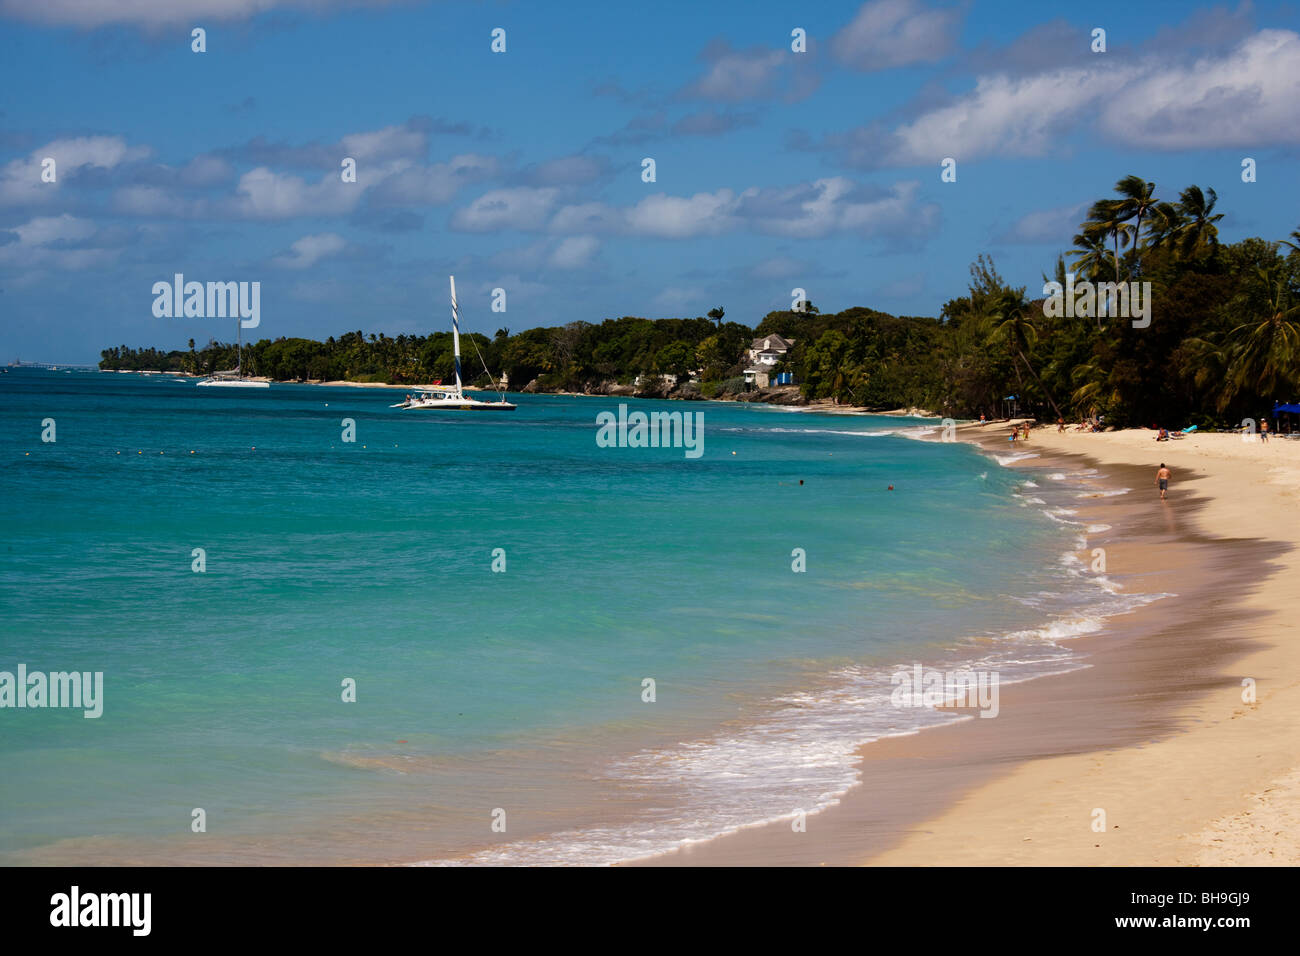 A peaceful cove and beach on the west coast of the Caribbean island of Barbados Stock Photo